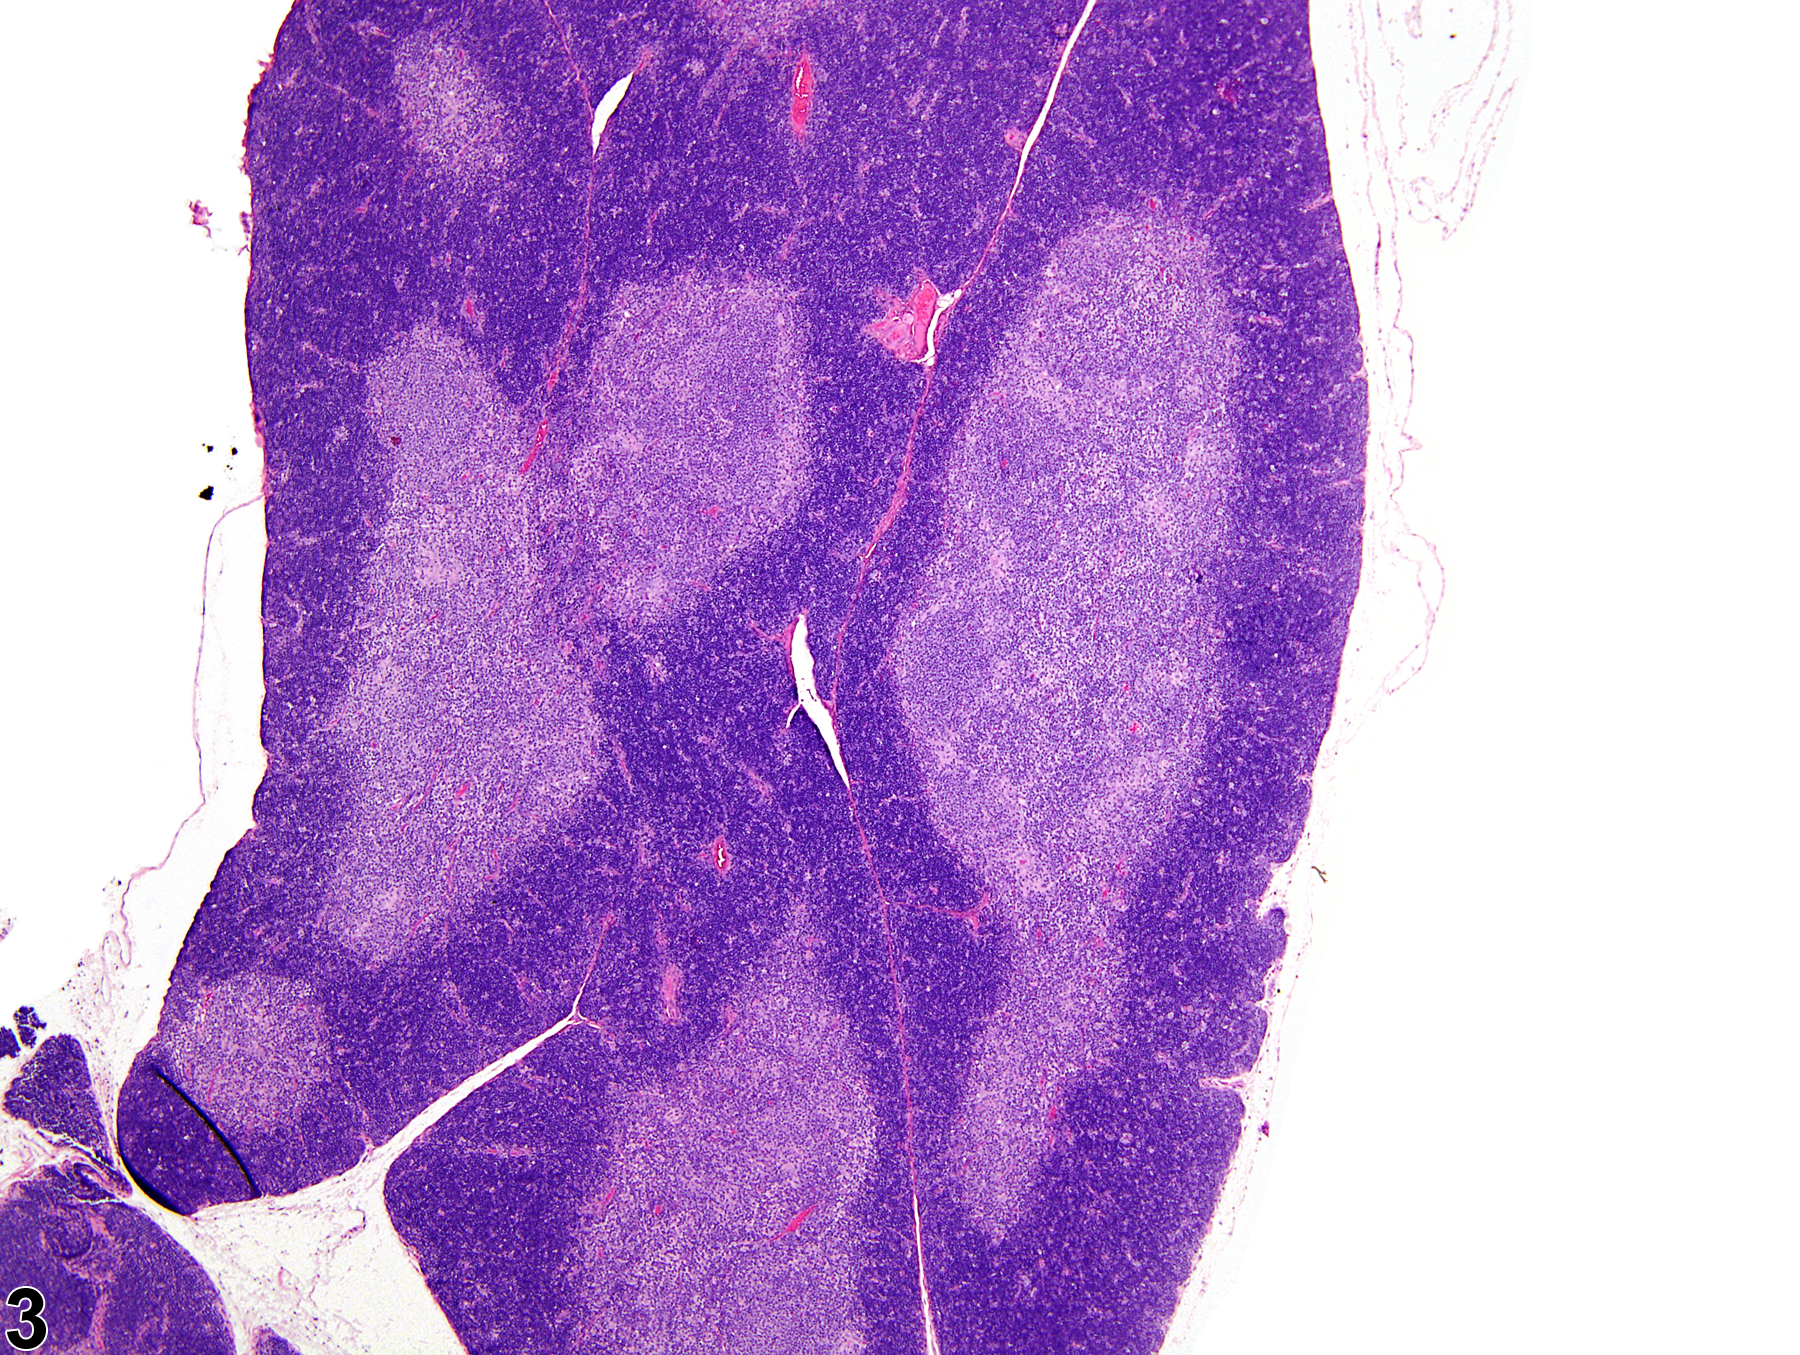 Image of atrophy in the thymus from a female F344/Ntac rat in a subchronic study